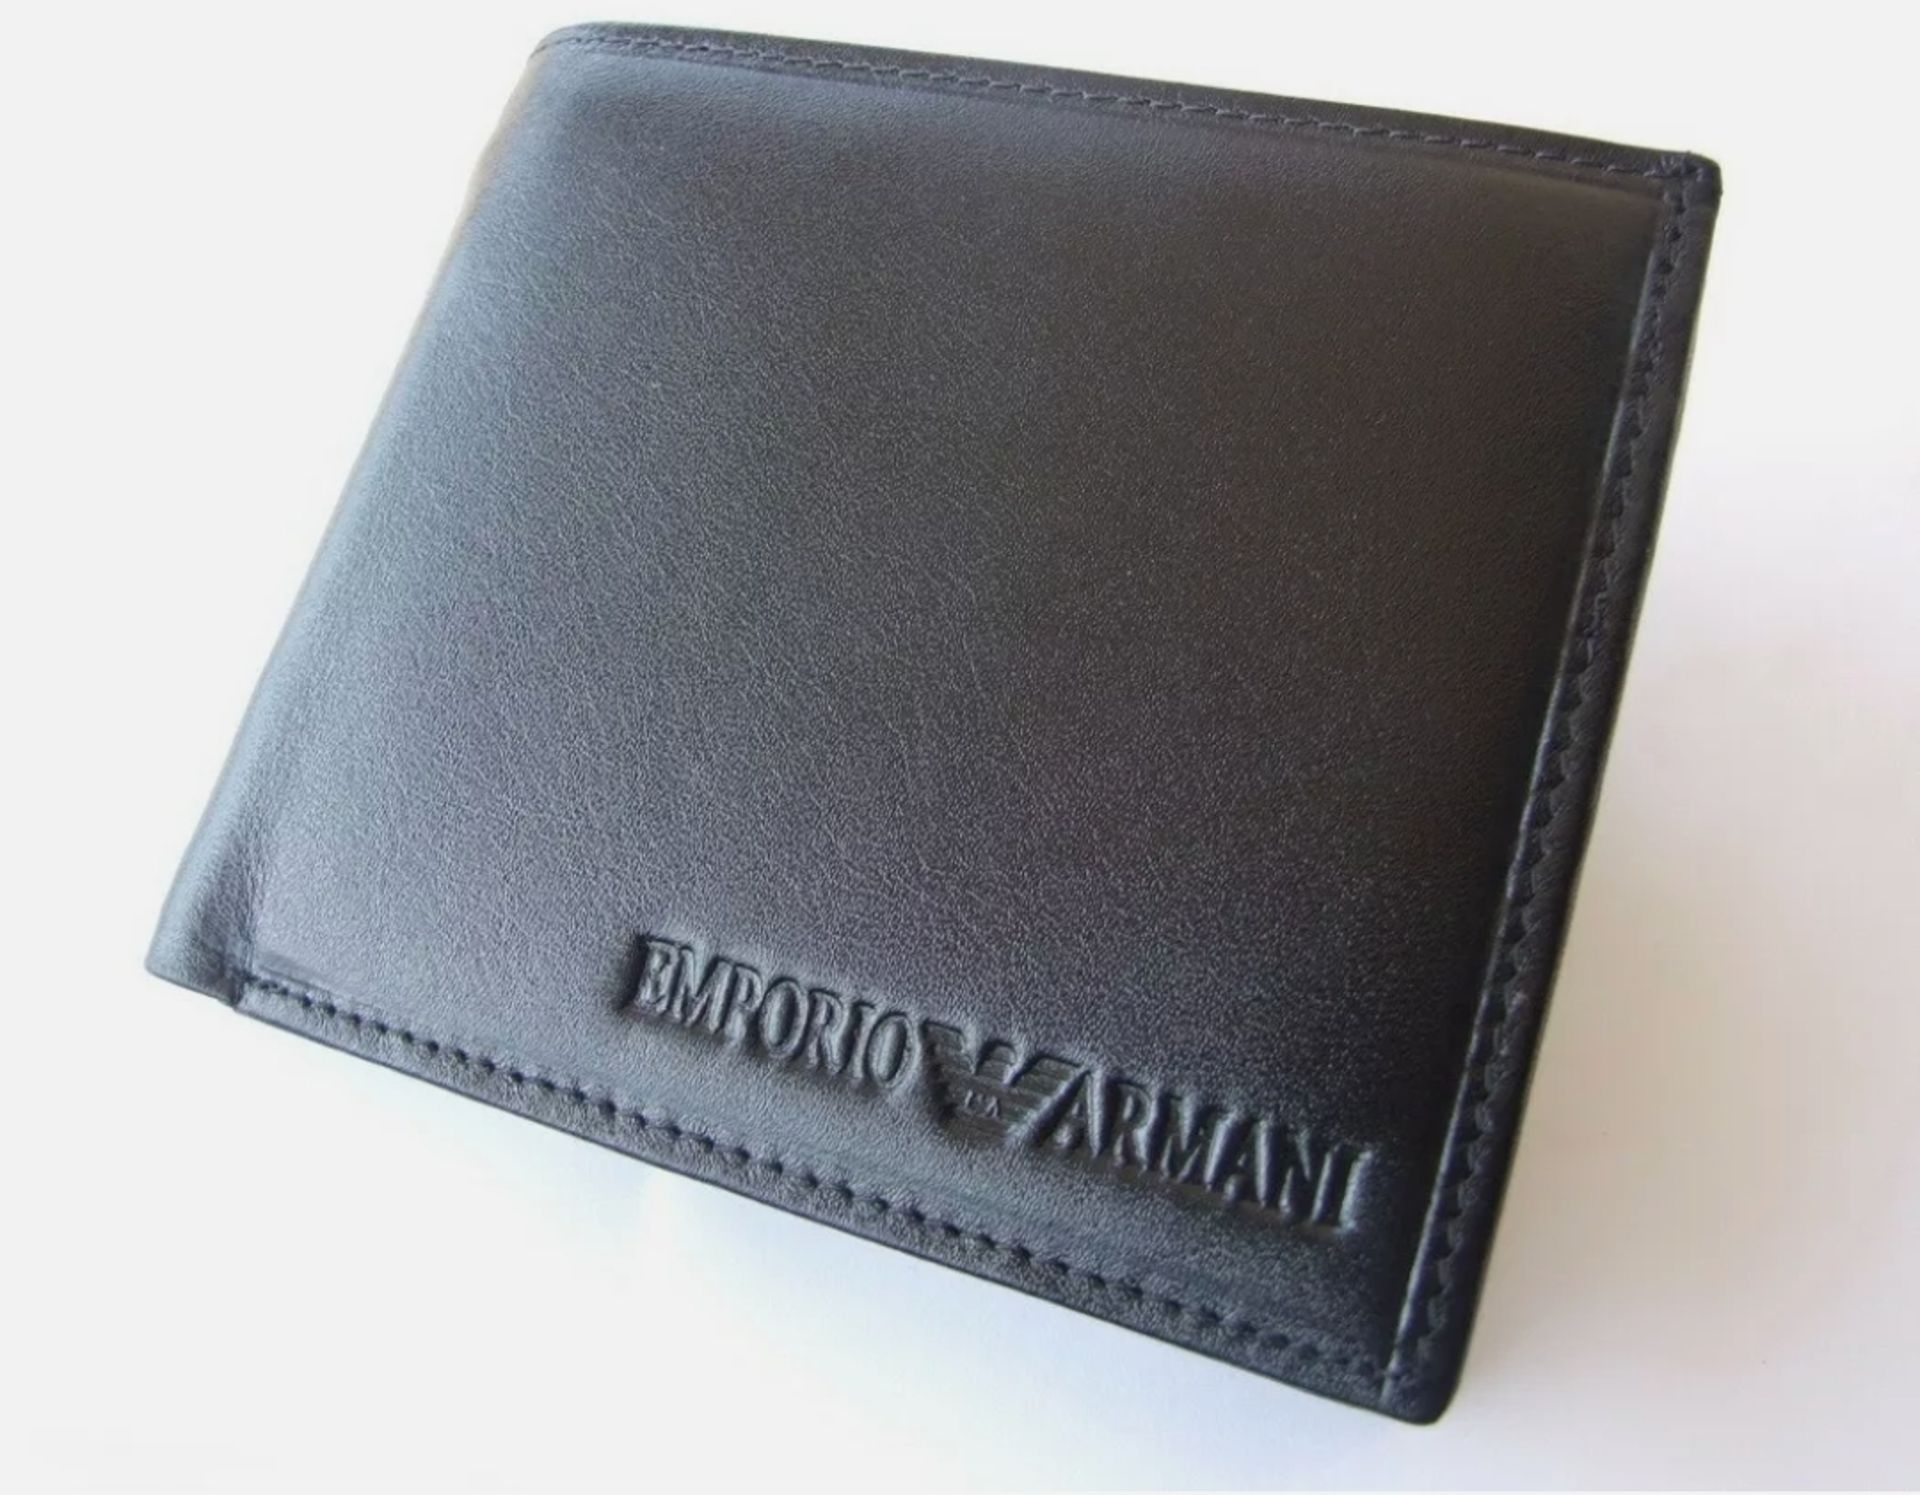 Emporio Armani Men's Leather Wallet - New With Box - Image 2 of 6